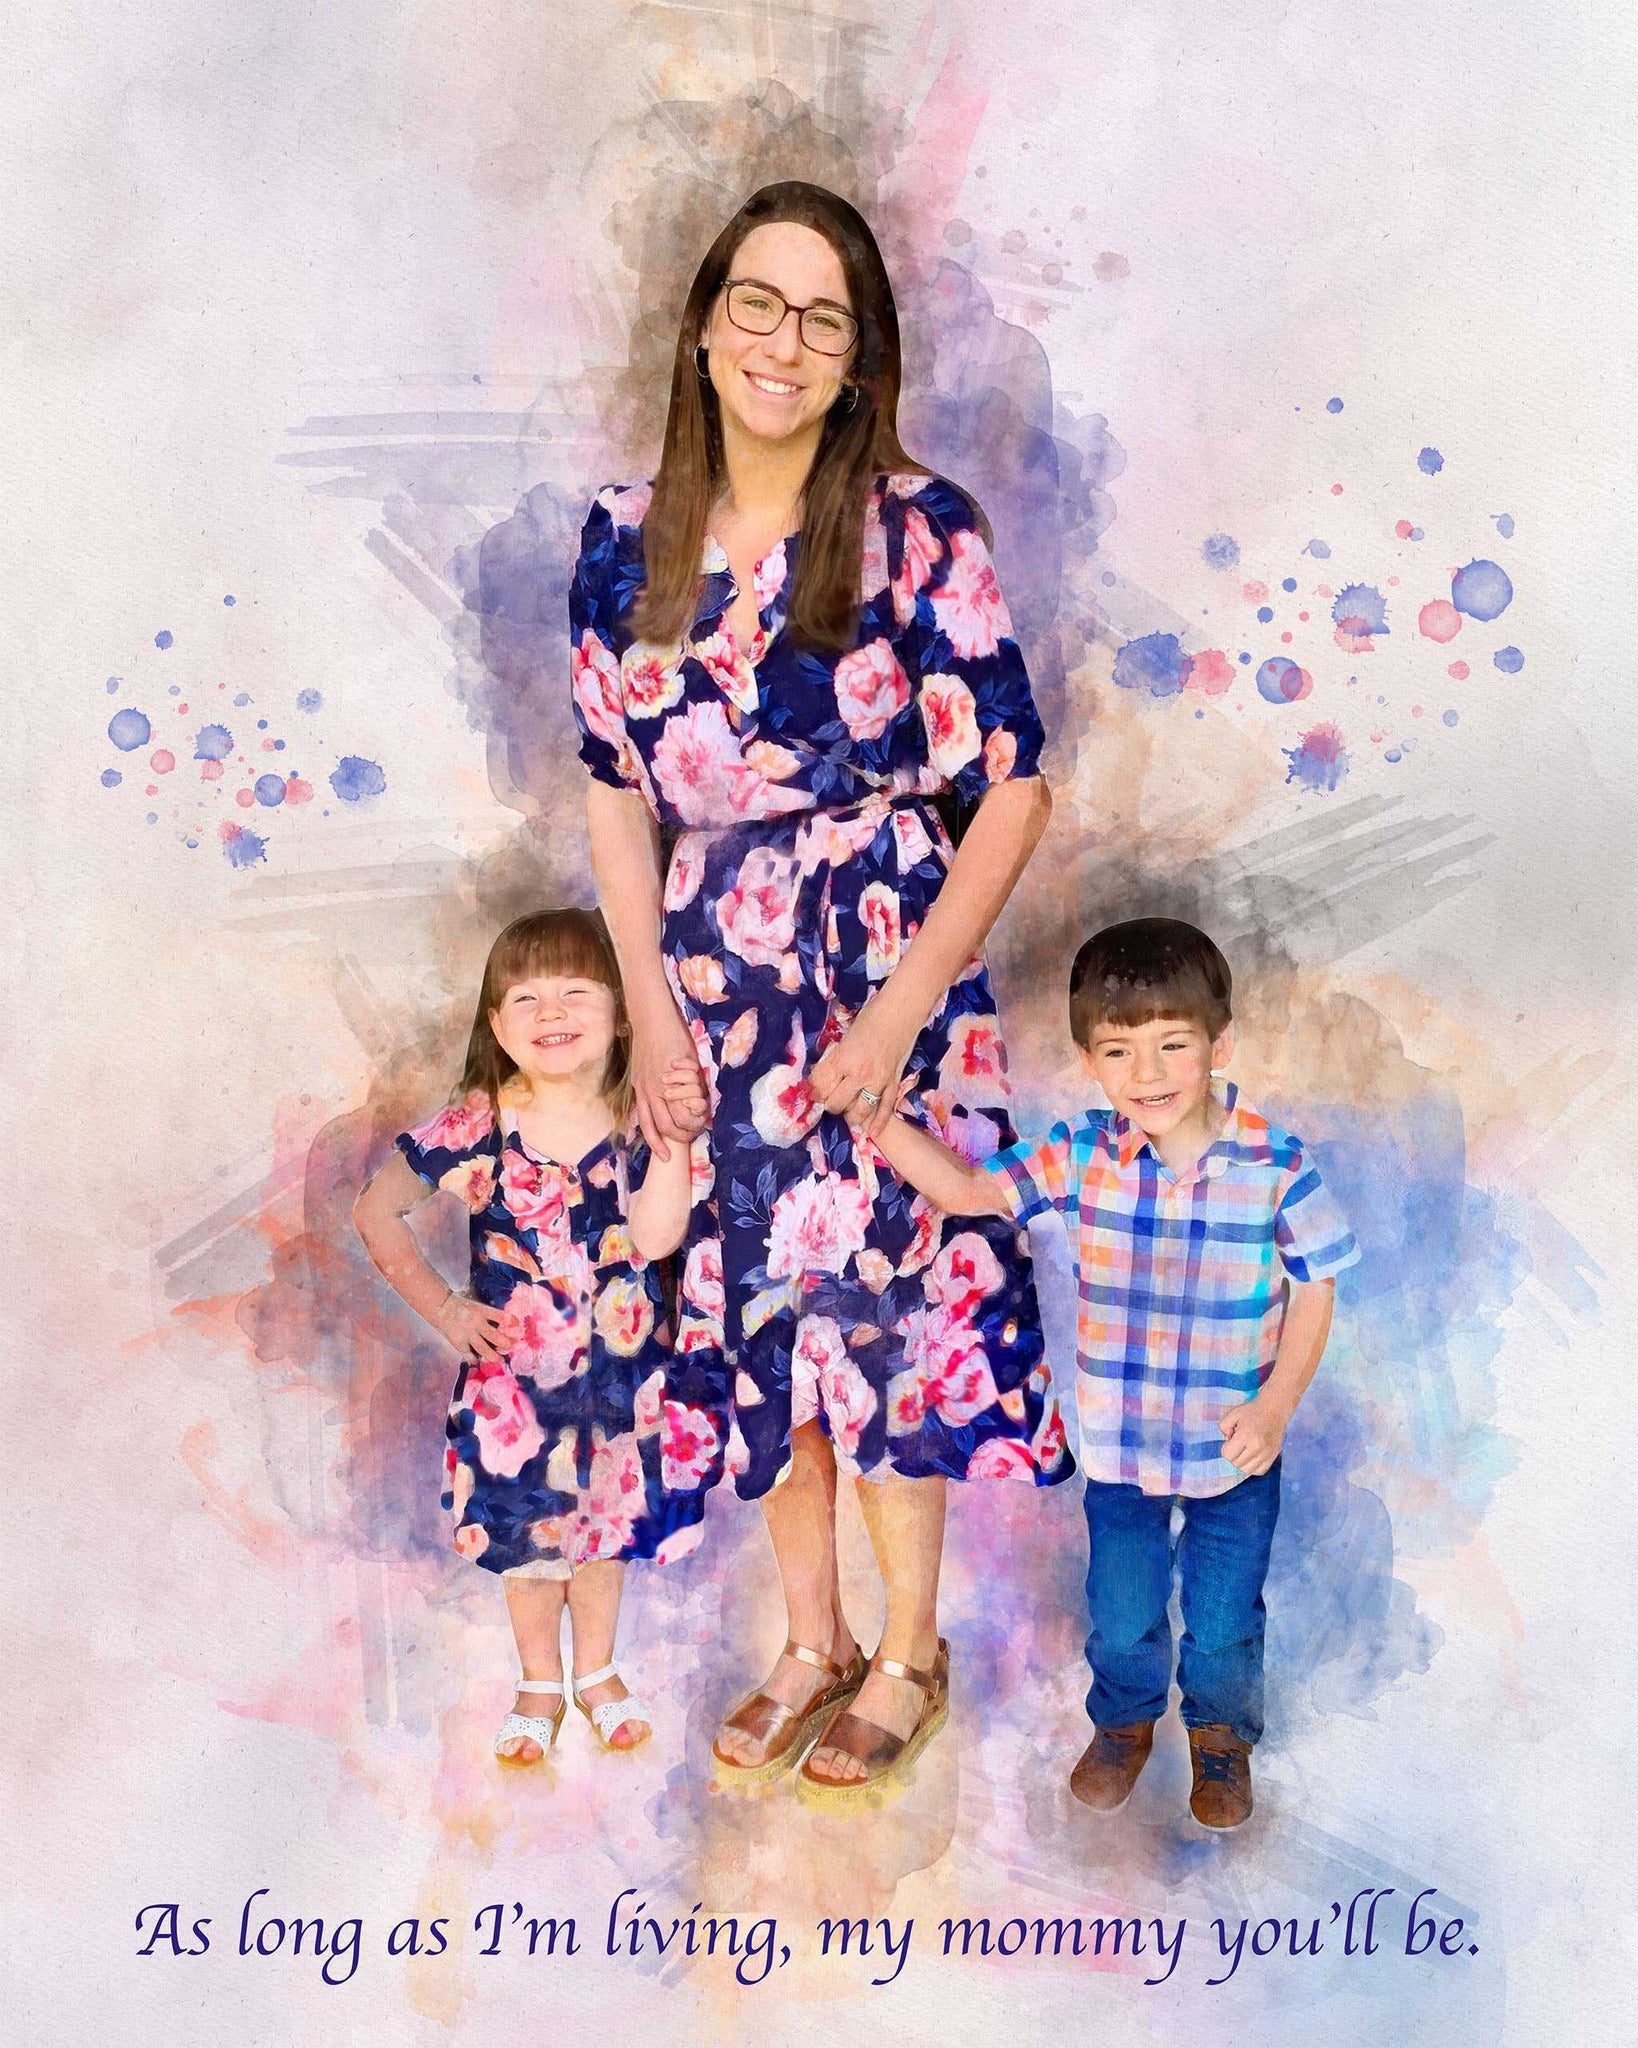 Mothers Day Last Minute Gift | Custom Canvas Portrait | 2-3 Business Days EXPRESS Delivery | Unique Personalized Gift Ideas - FromPicToArt